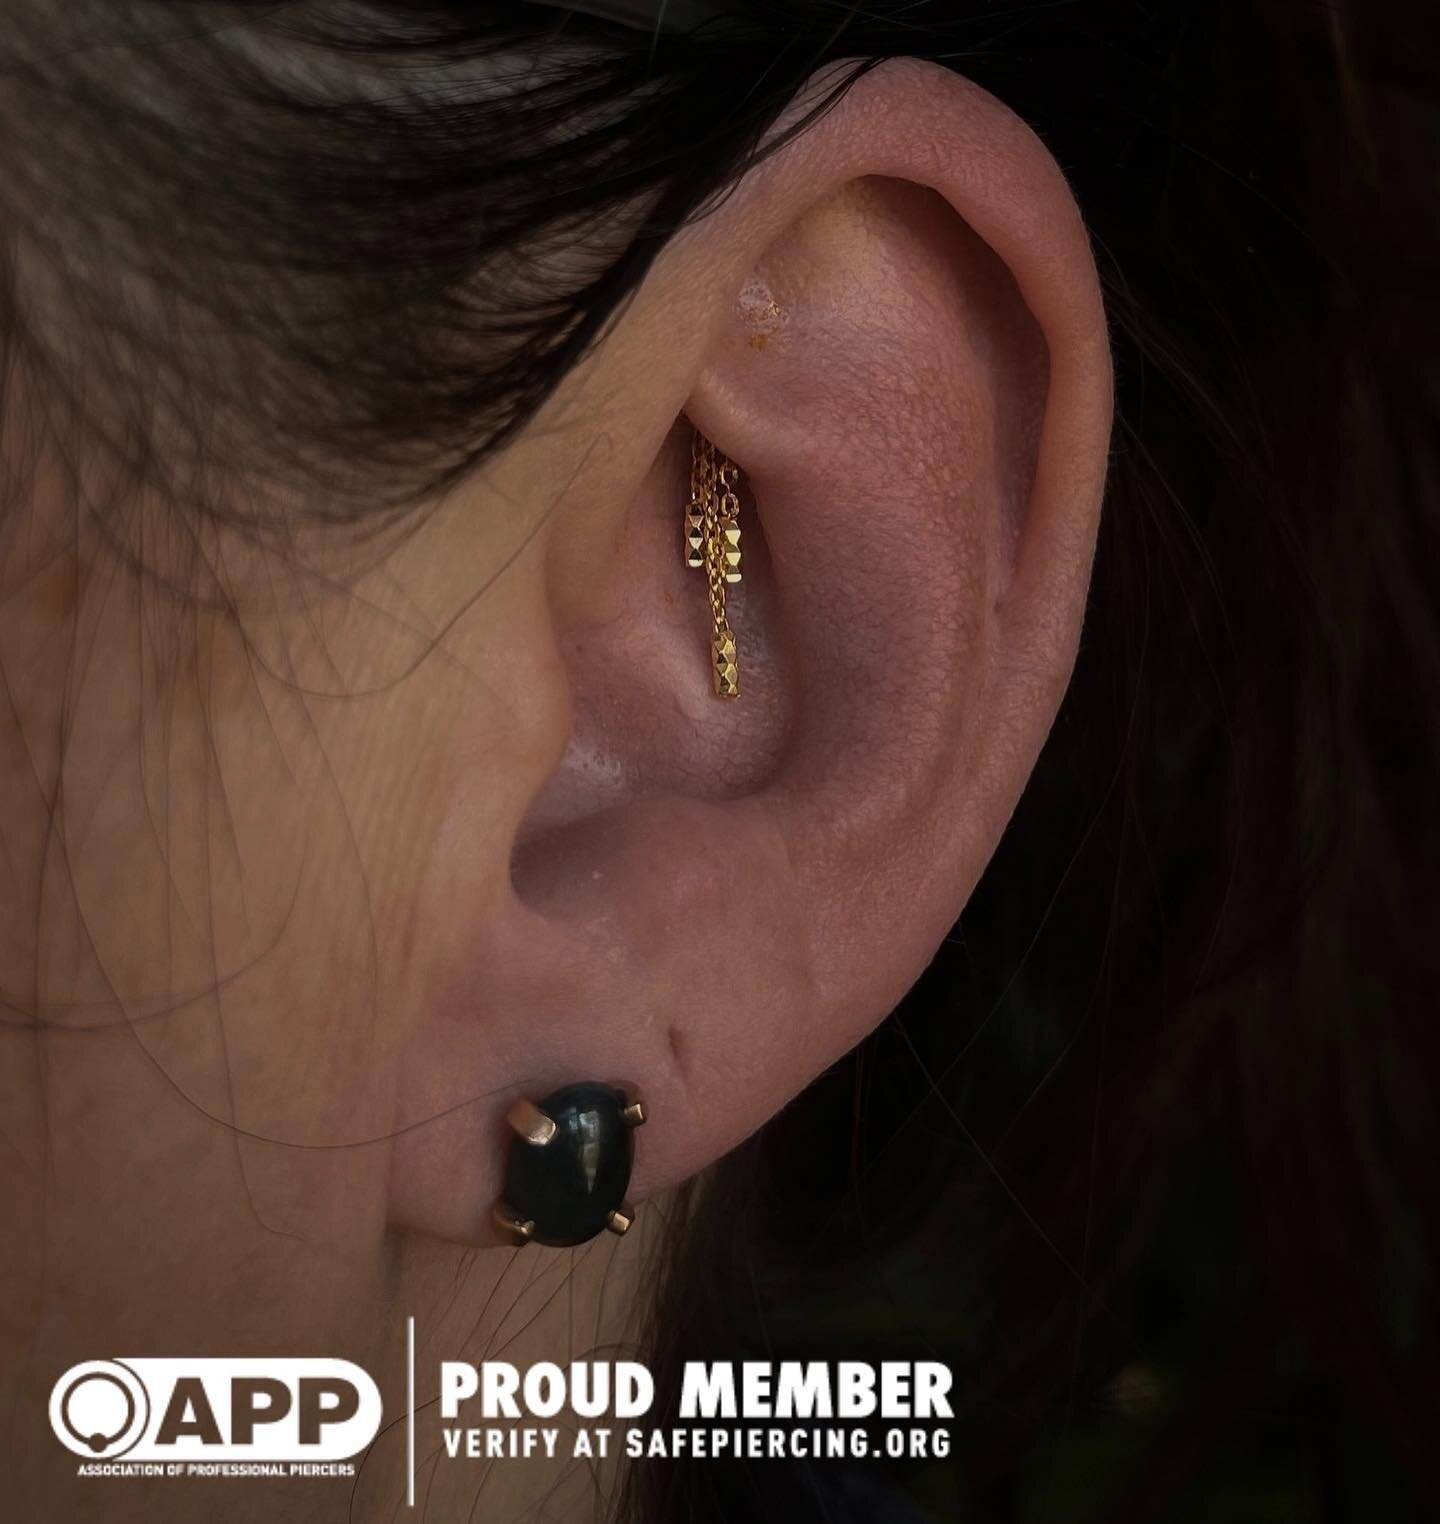 #Repost @coleradermacher​
---​
Gotta love when clients let you do your own thing! Fun little chain action on this one ❤️&zwj;🔥 geo chain in yellow gold from the lovely pupil.hall safepiercing